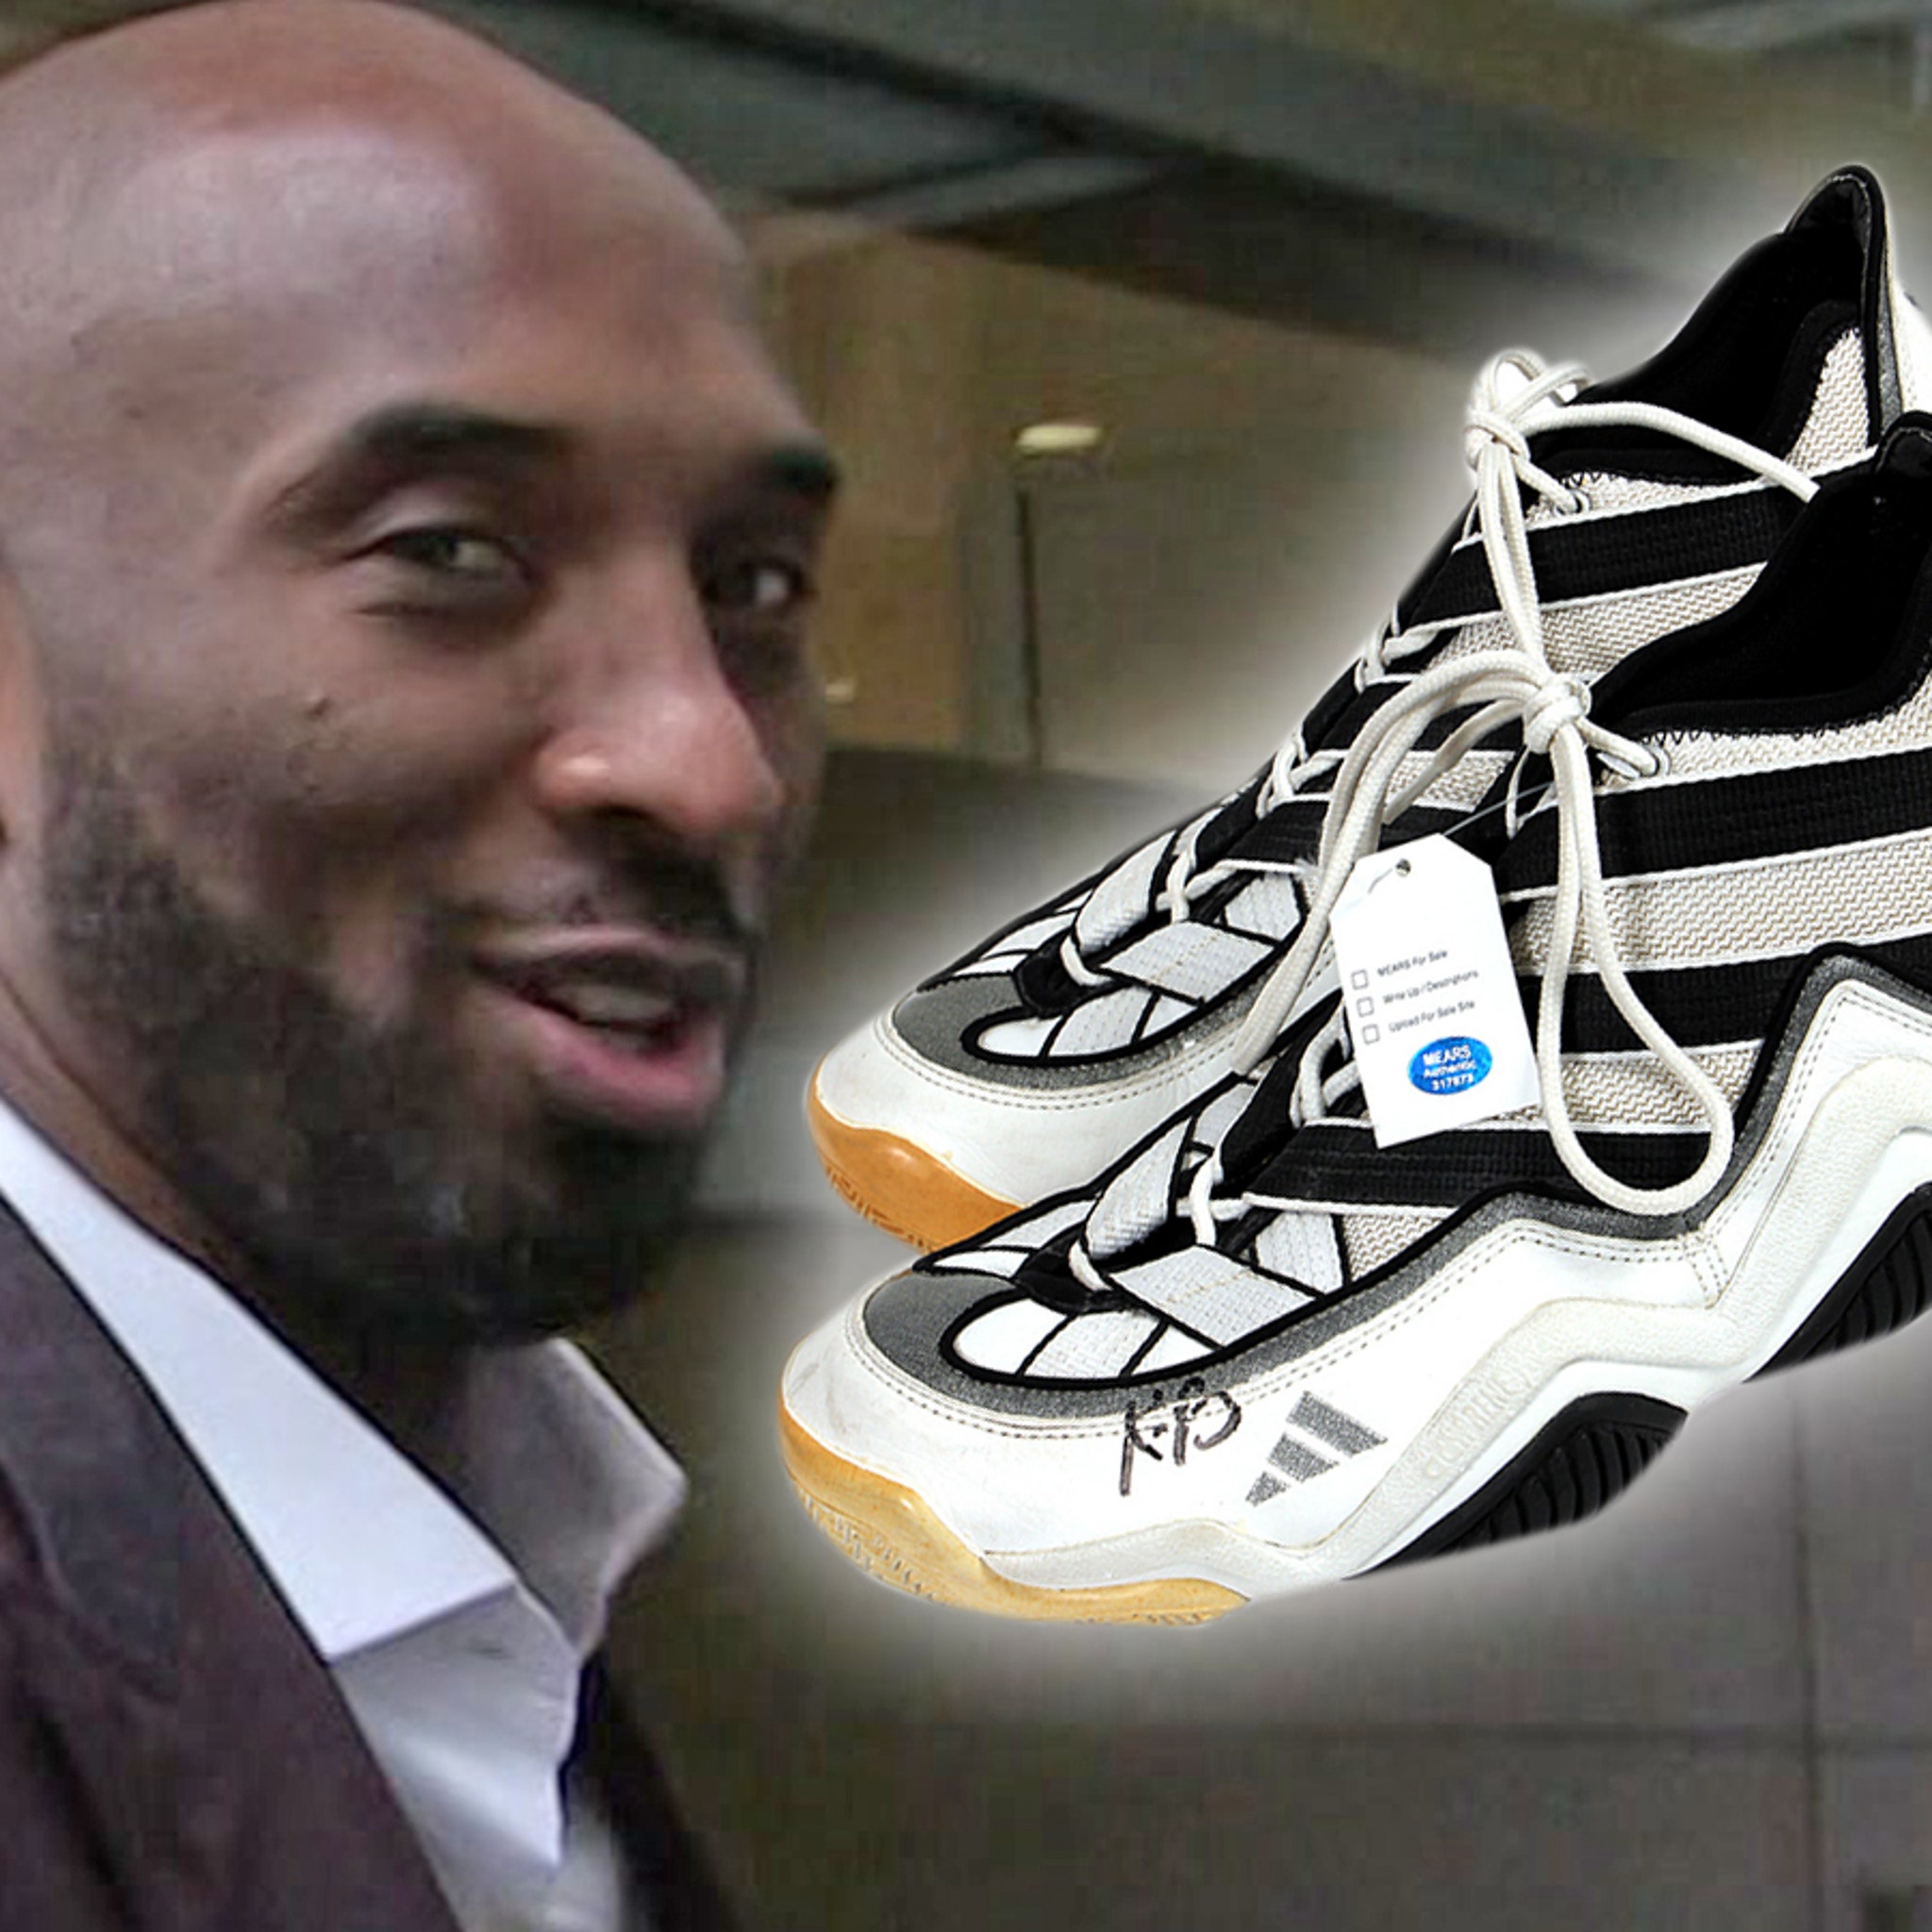 Kobe after 17yrs still has style & swag